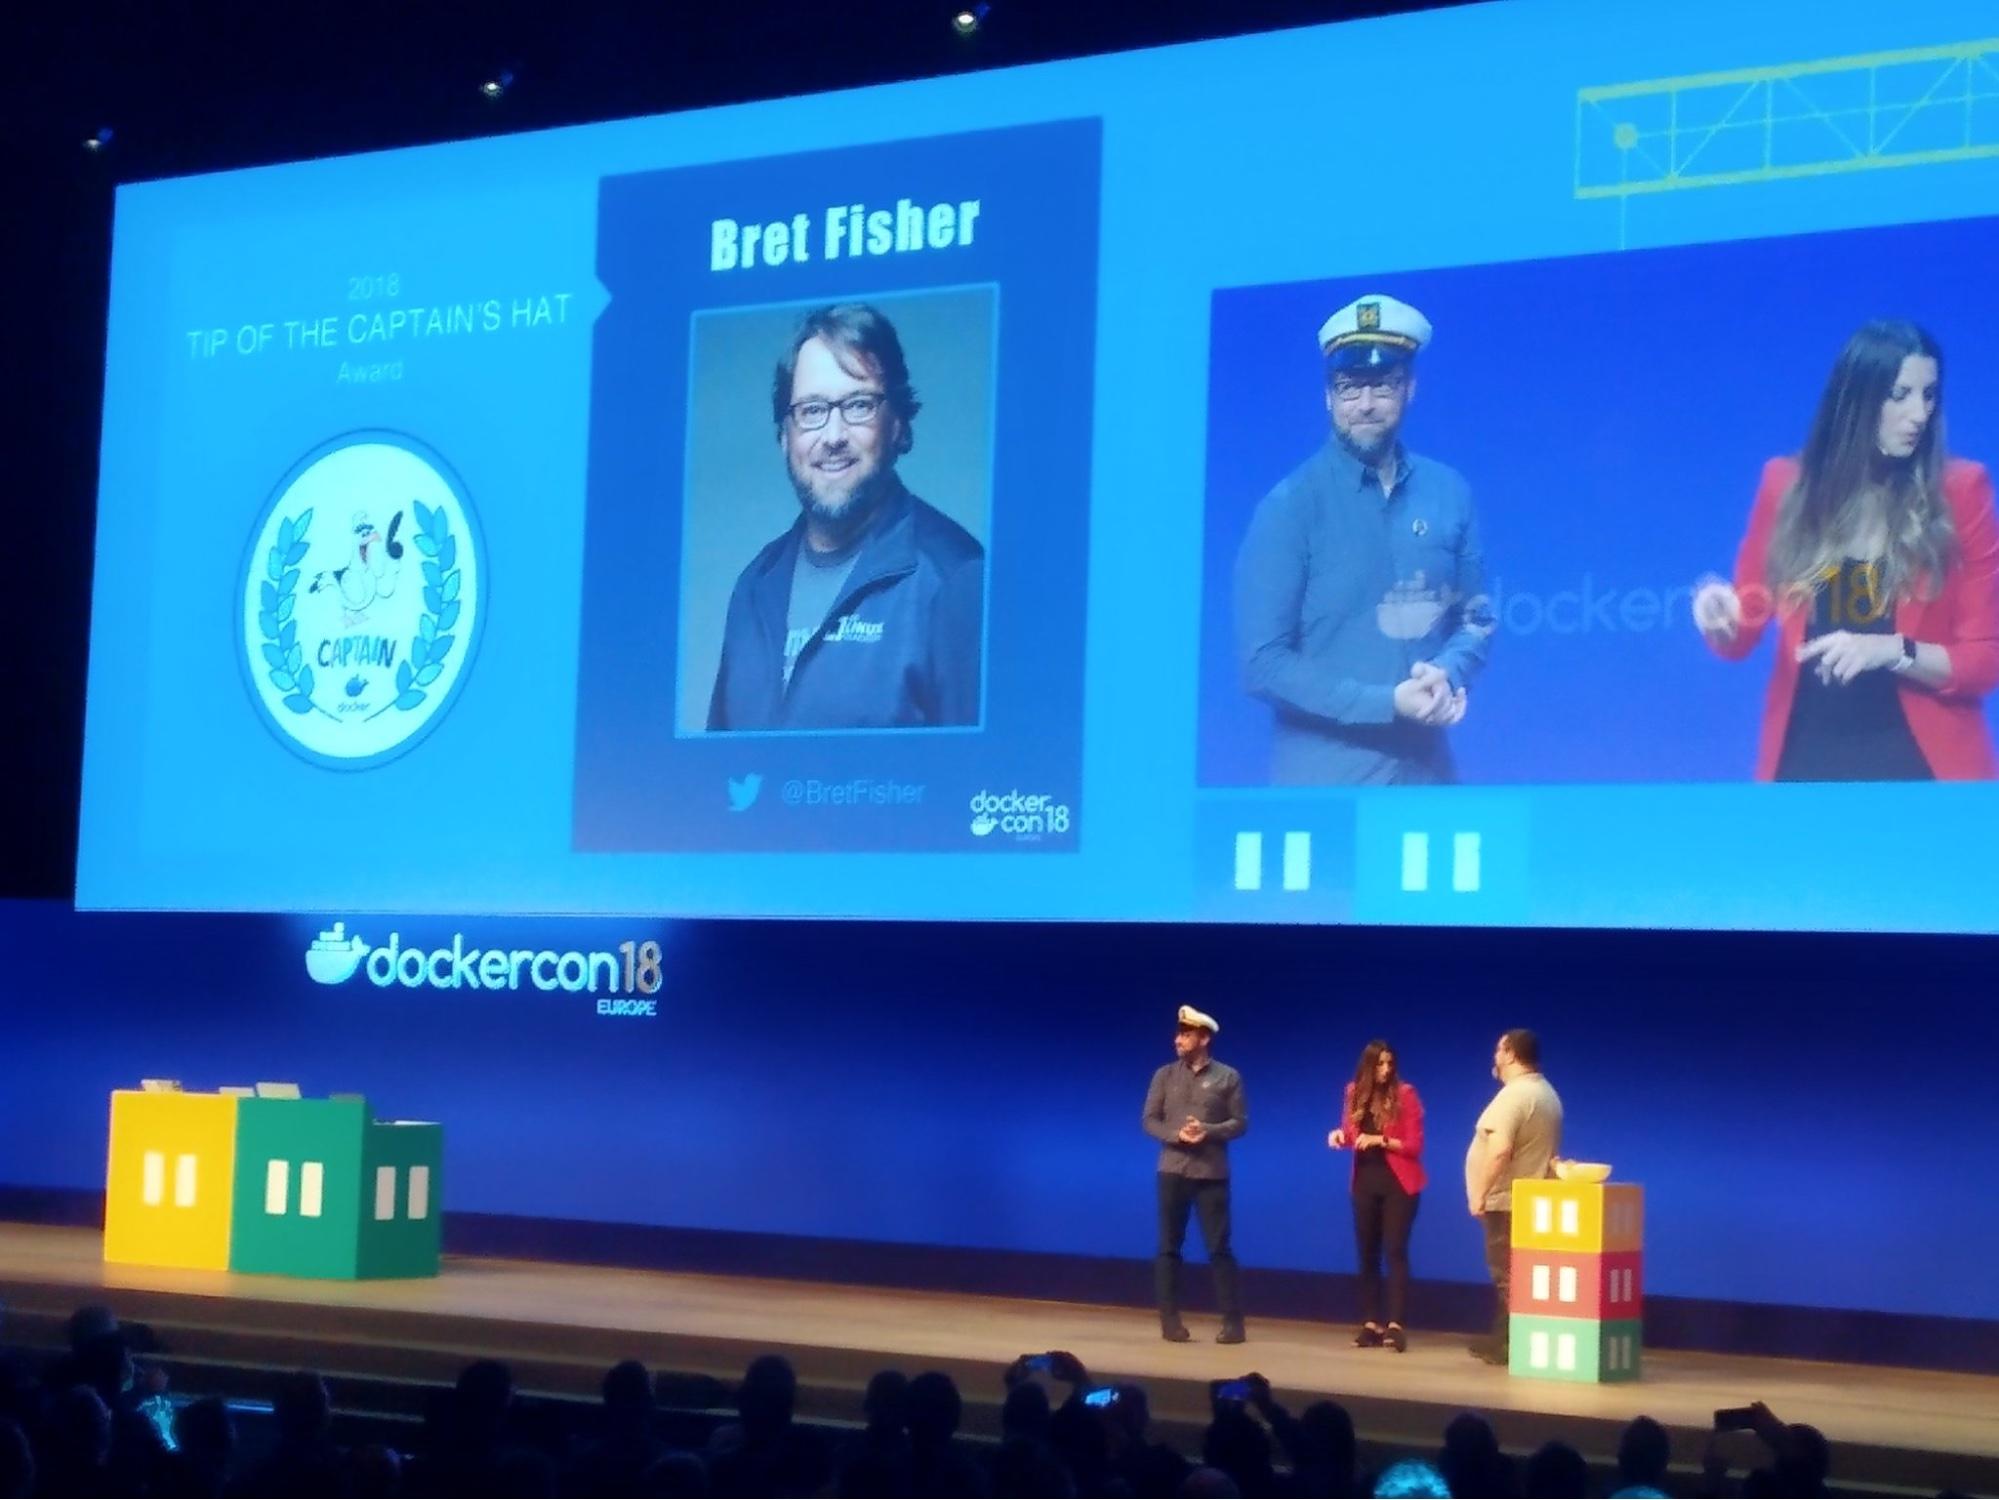 DockerCon 18 Europe keynote stage with Jenny Burcio and Mano Marks presenting Bret Fisher with the "Top of the Captains Hat" award. Bret is wearing a white boating captains hat.